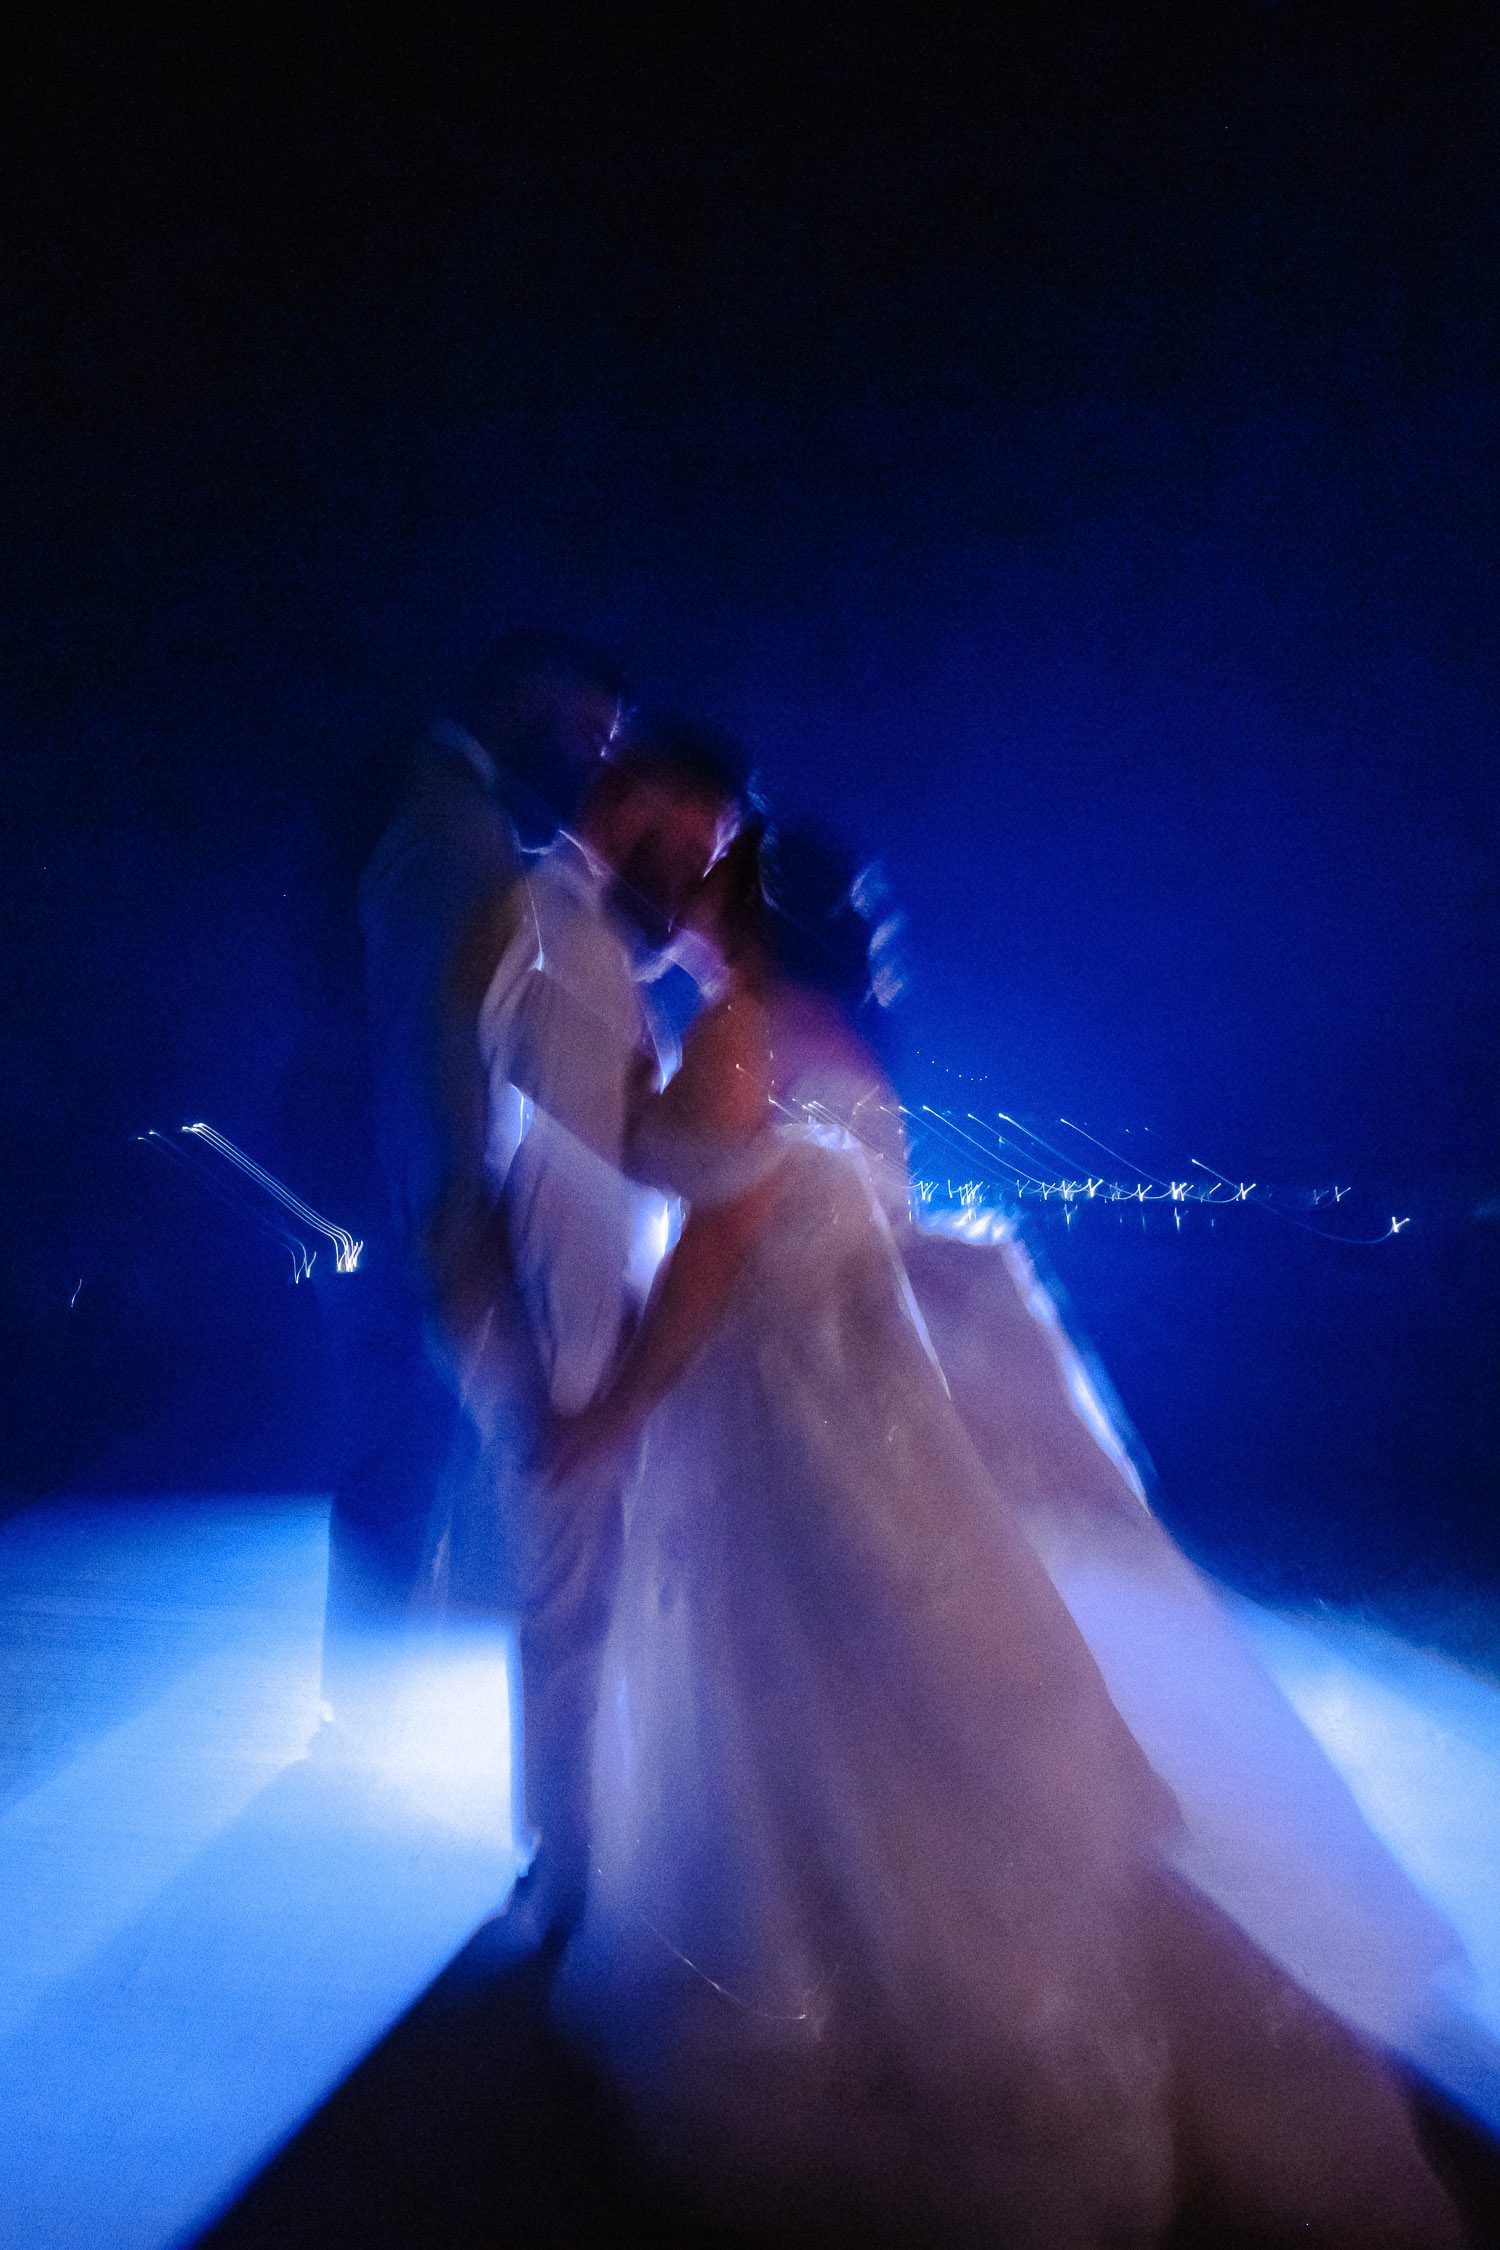 Blurry photo with blue colors and bride and groom kissing